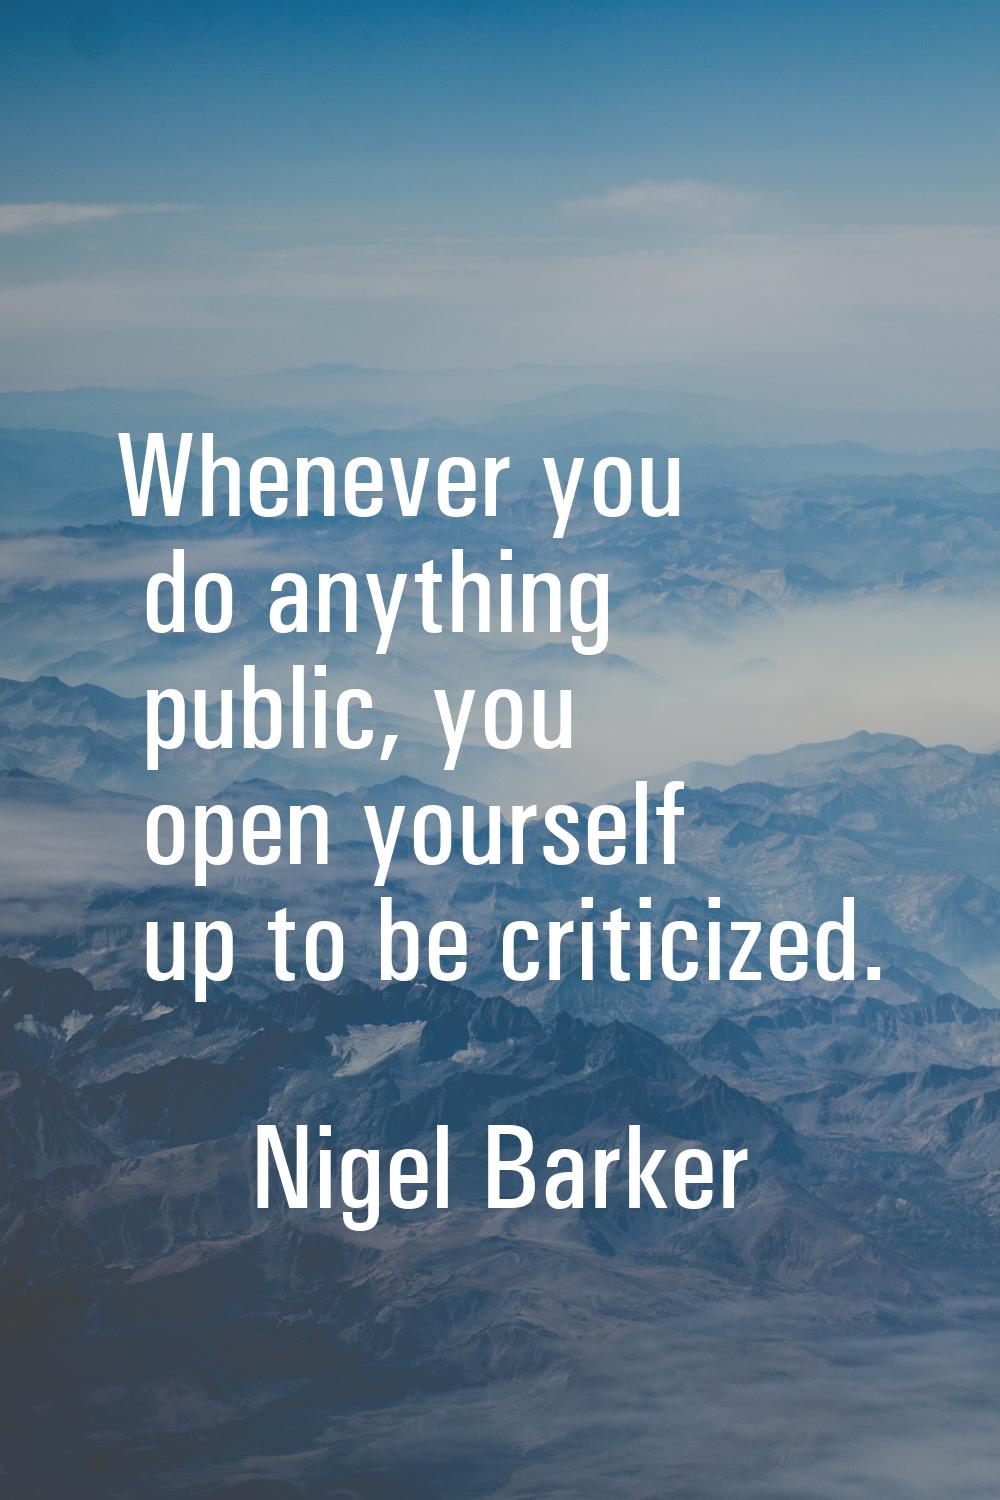 Whenever you do anything public, you open yourself up to be criticized.